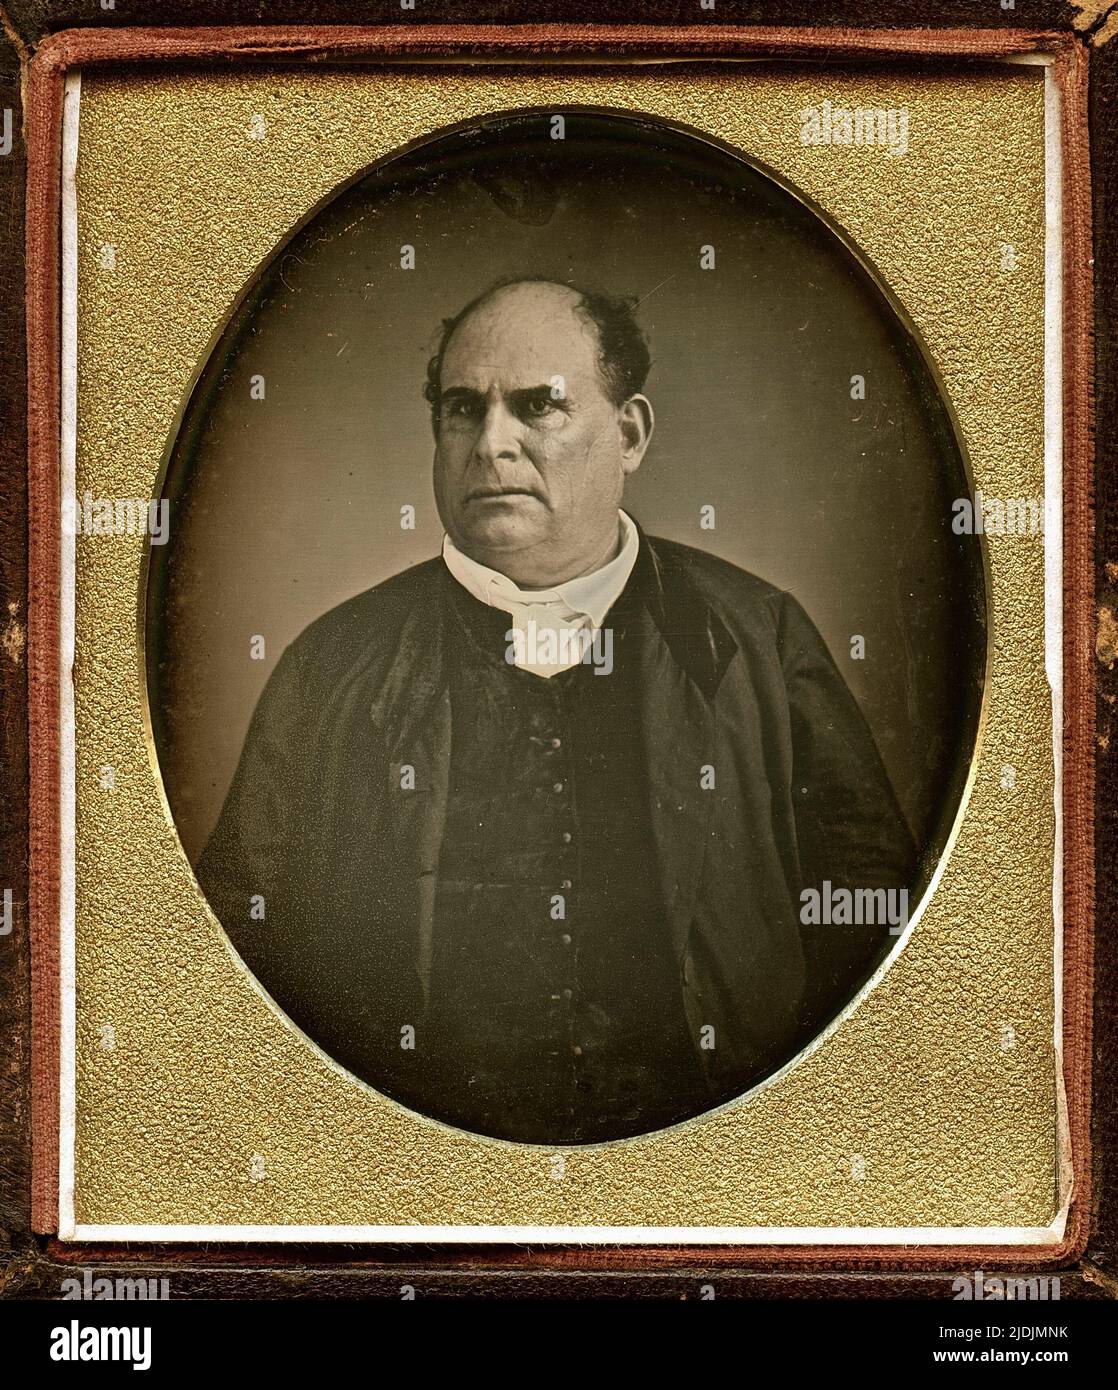 Daguerreotype portrait of a man dressed in clerical clothing, circa 1845. Stock Photo